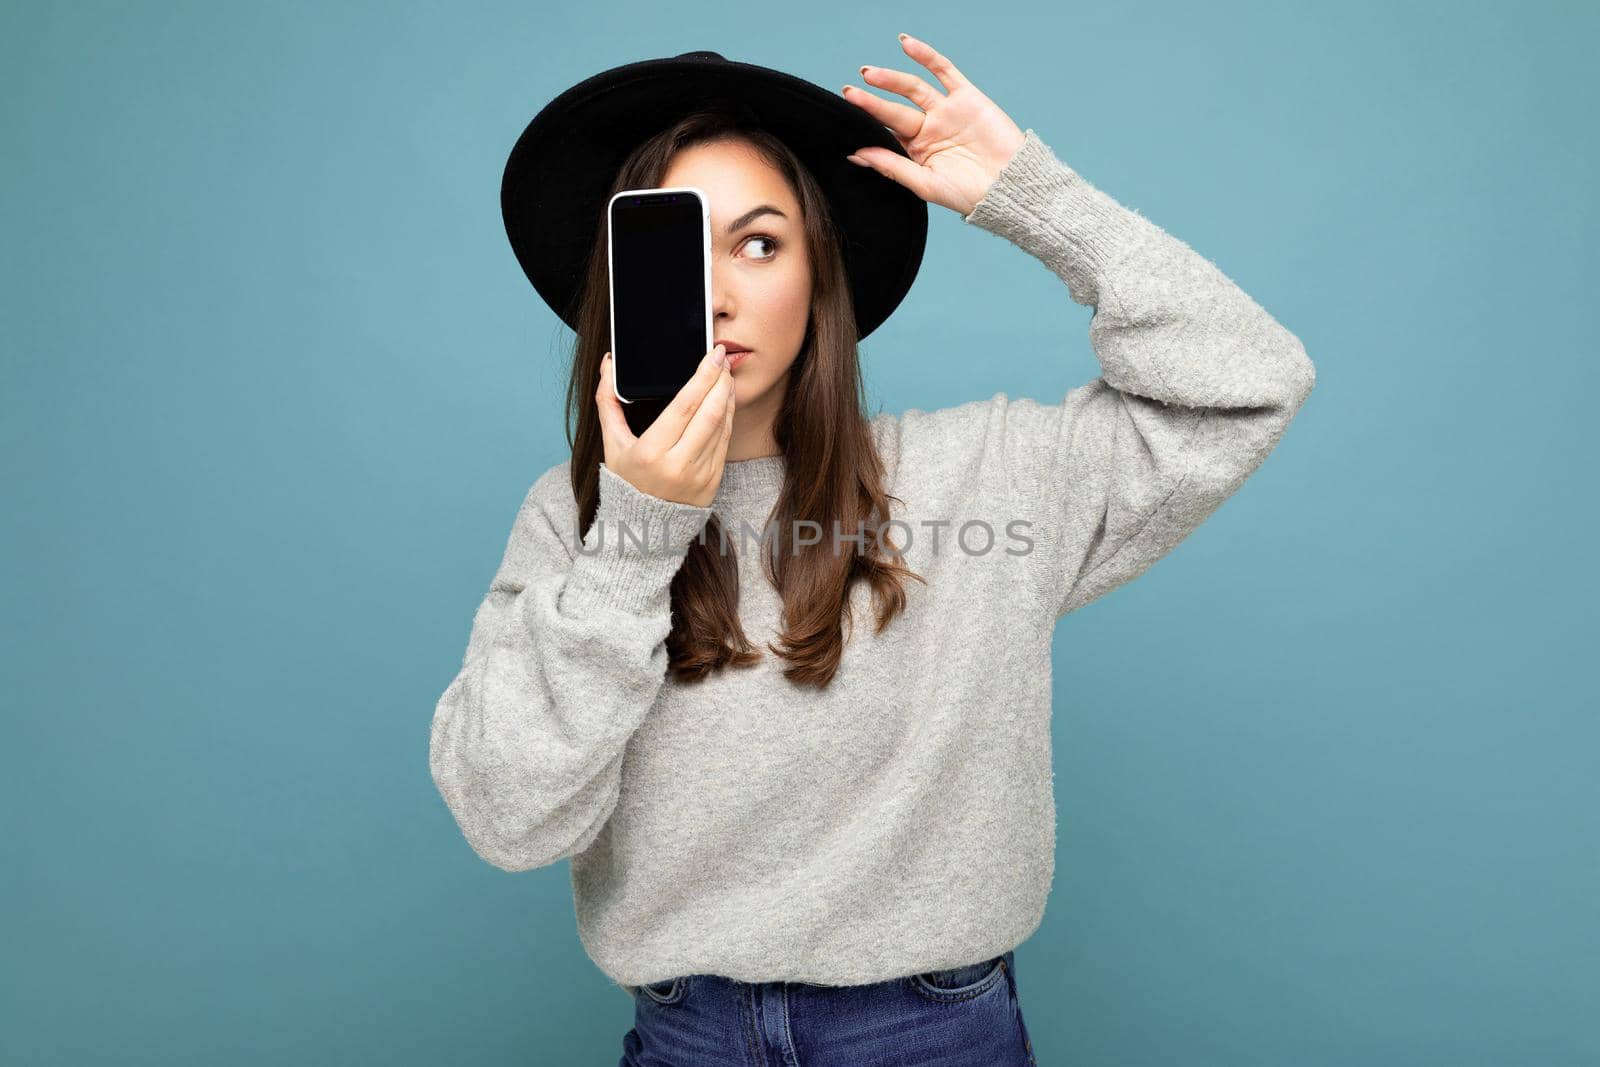 woman wearing black hat and grey sweater holding mobilephone showing smartphone isolated on background looking to the side. mock up